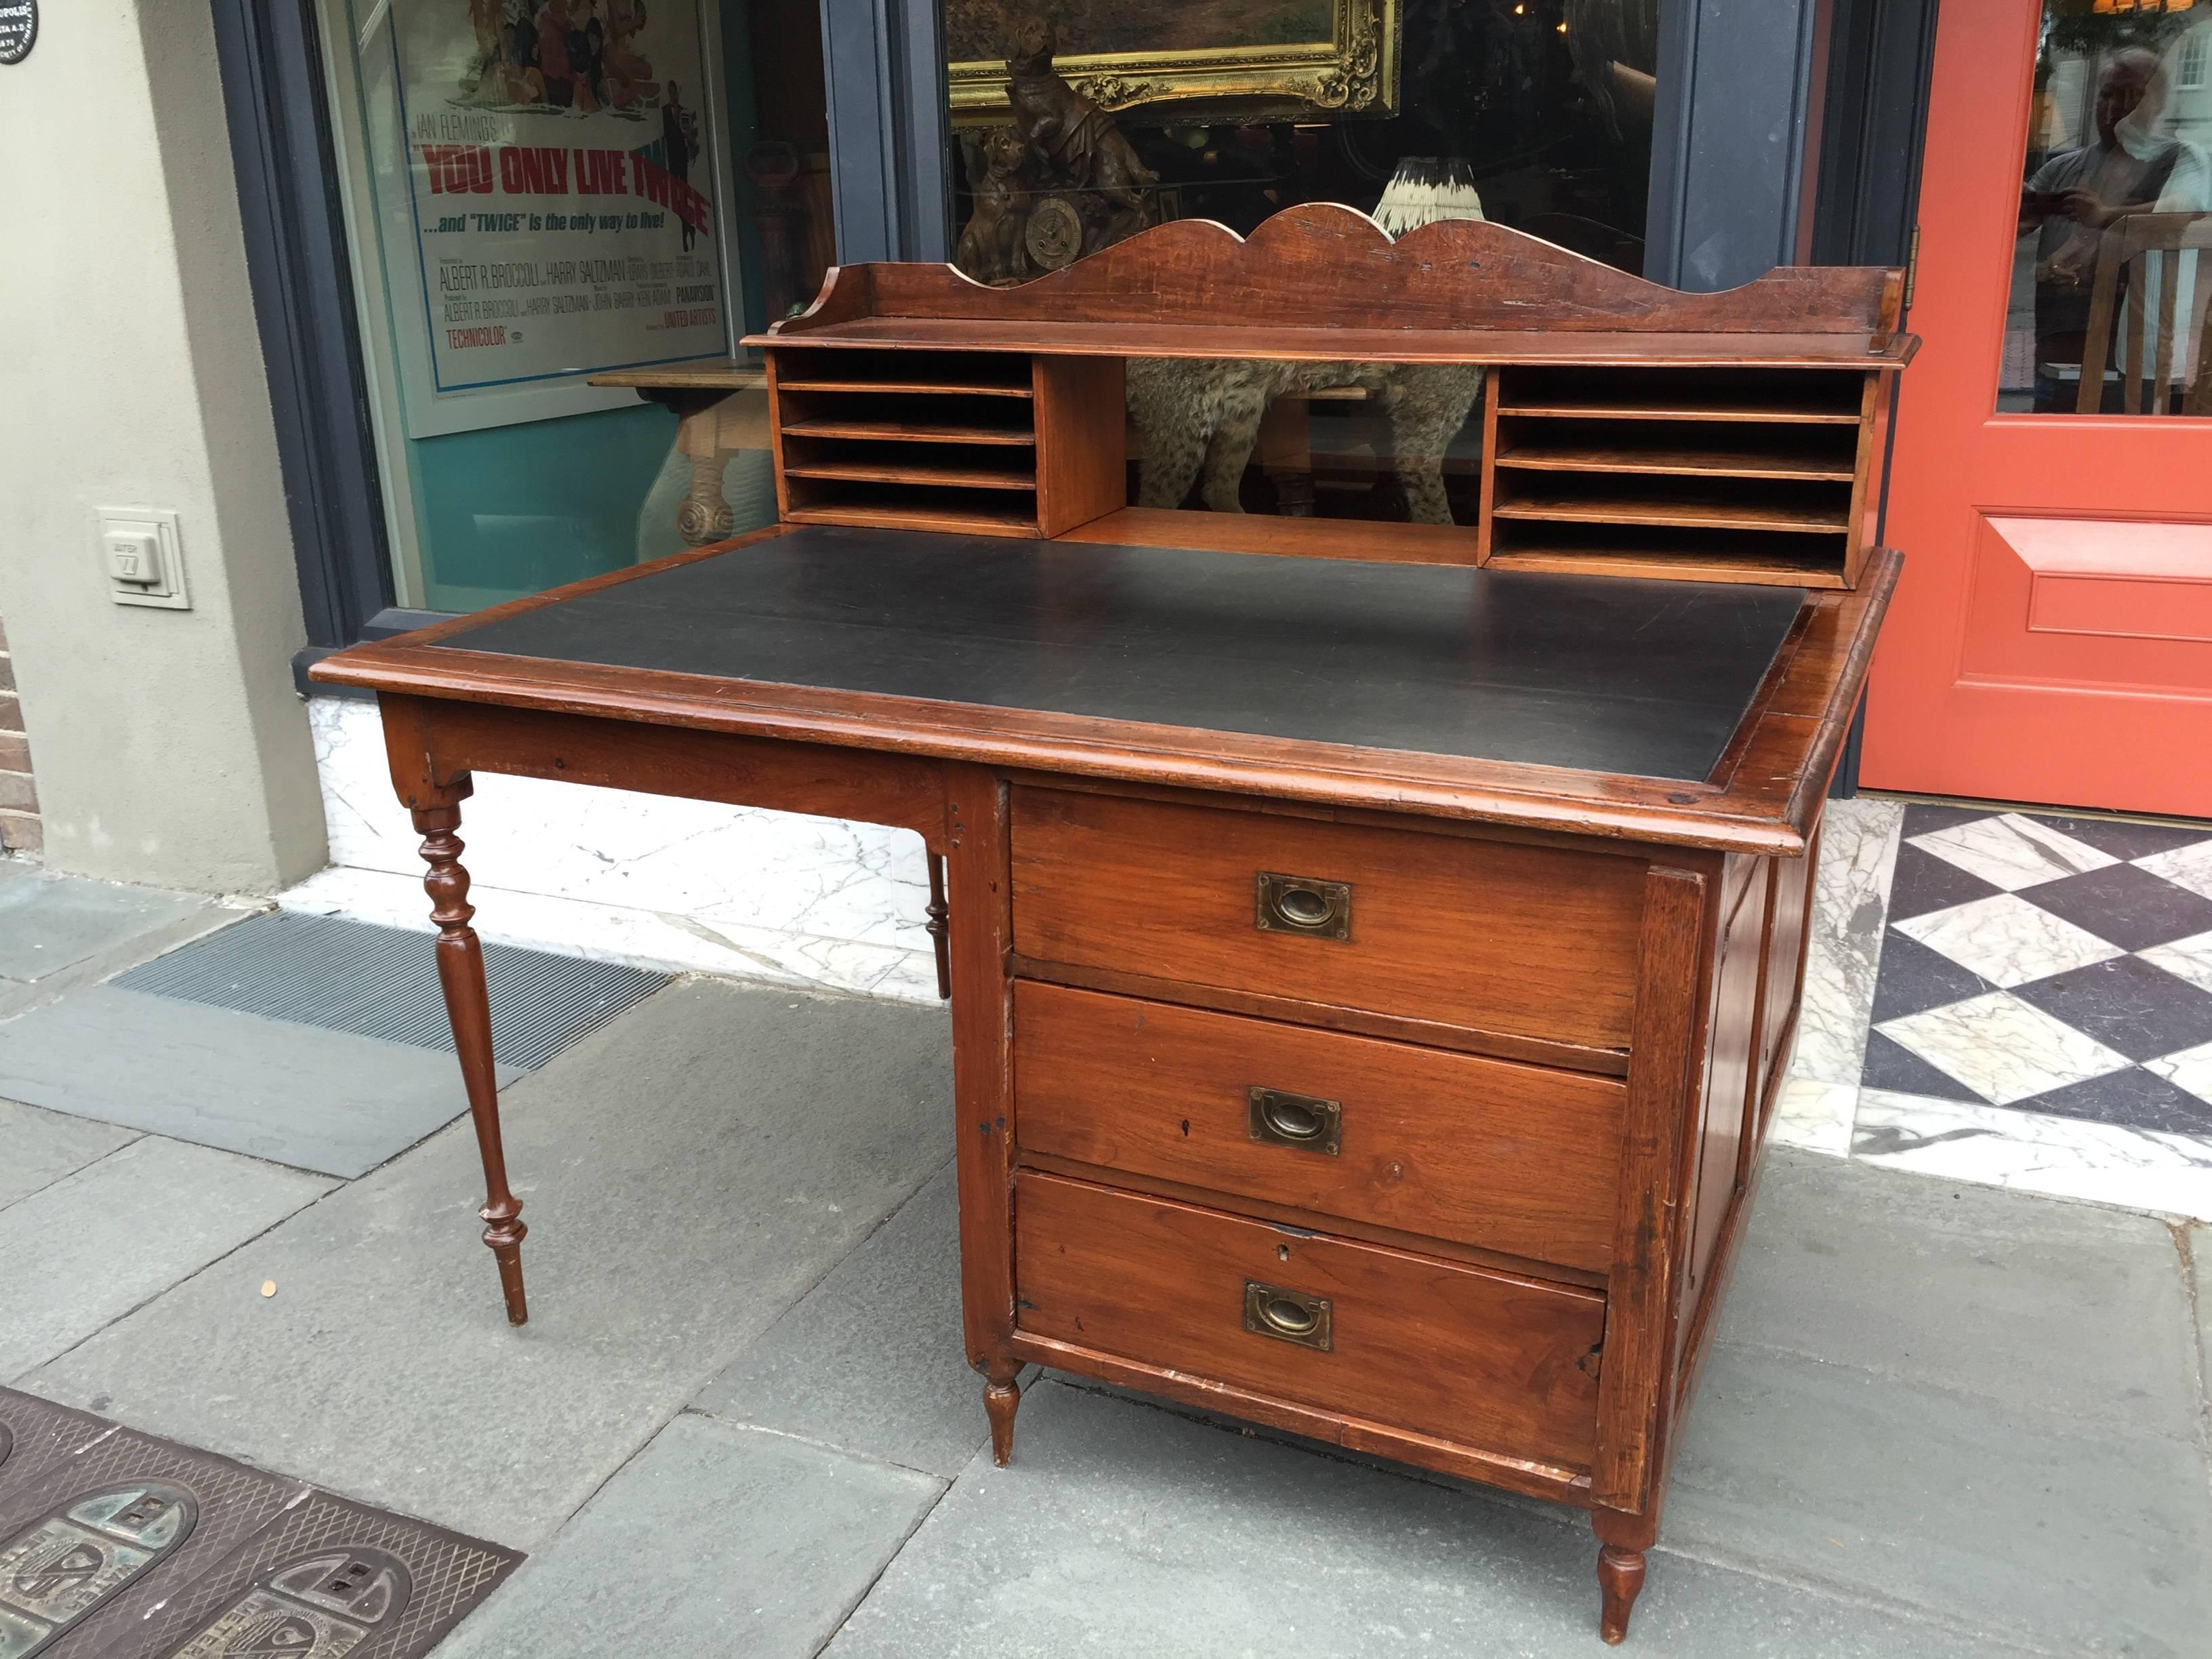 Teak large leather top writing desk with three drawers on base. Nice compartmentalized upper section for letters and other papers.